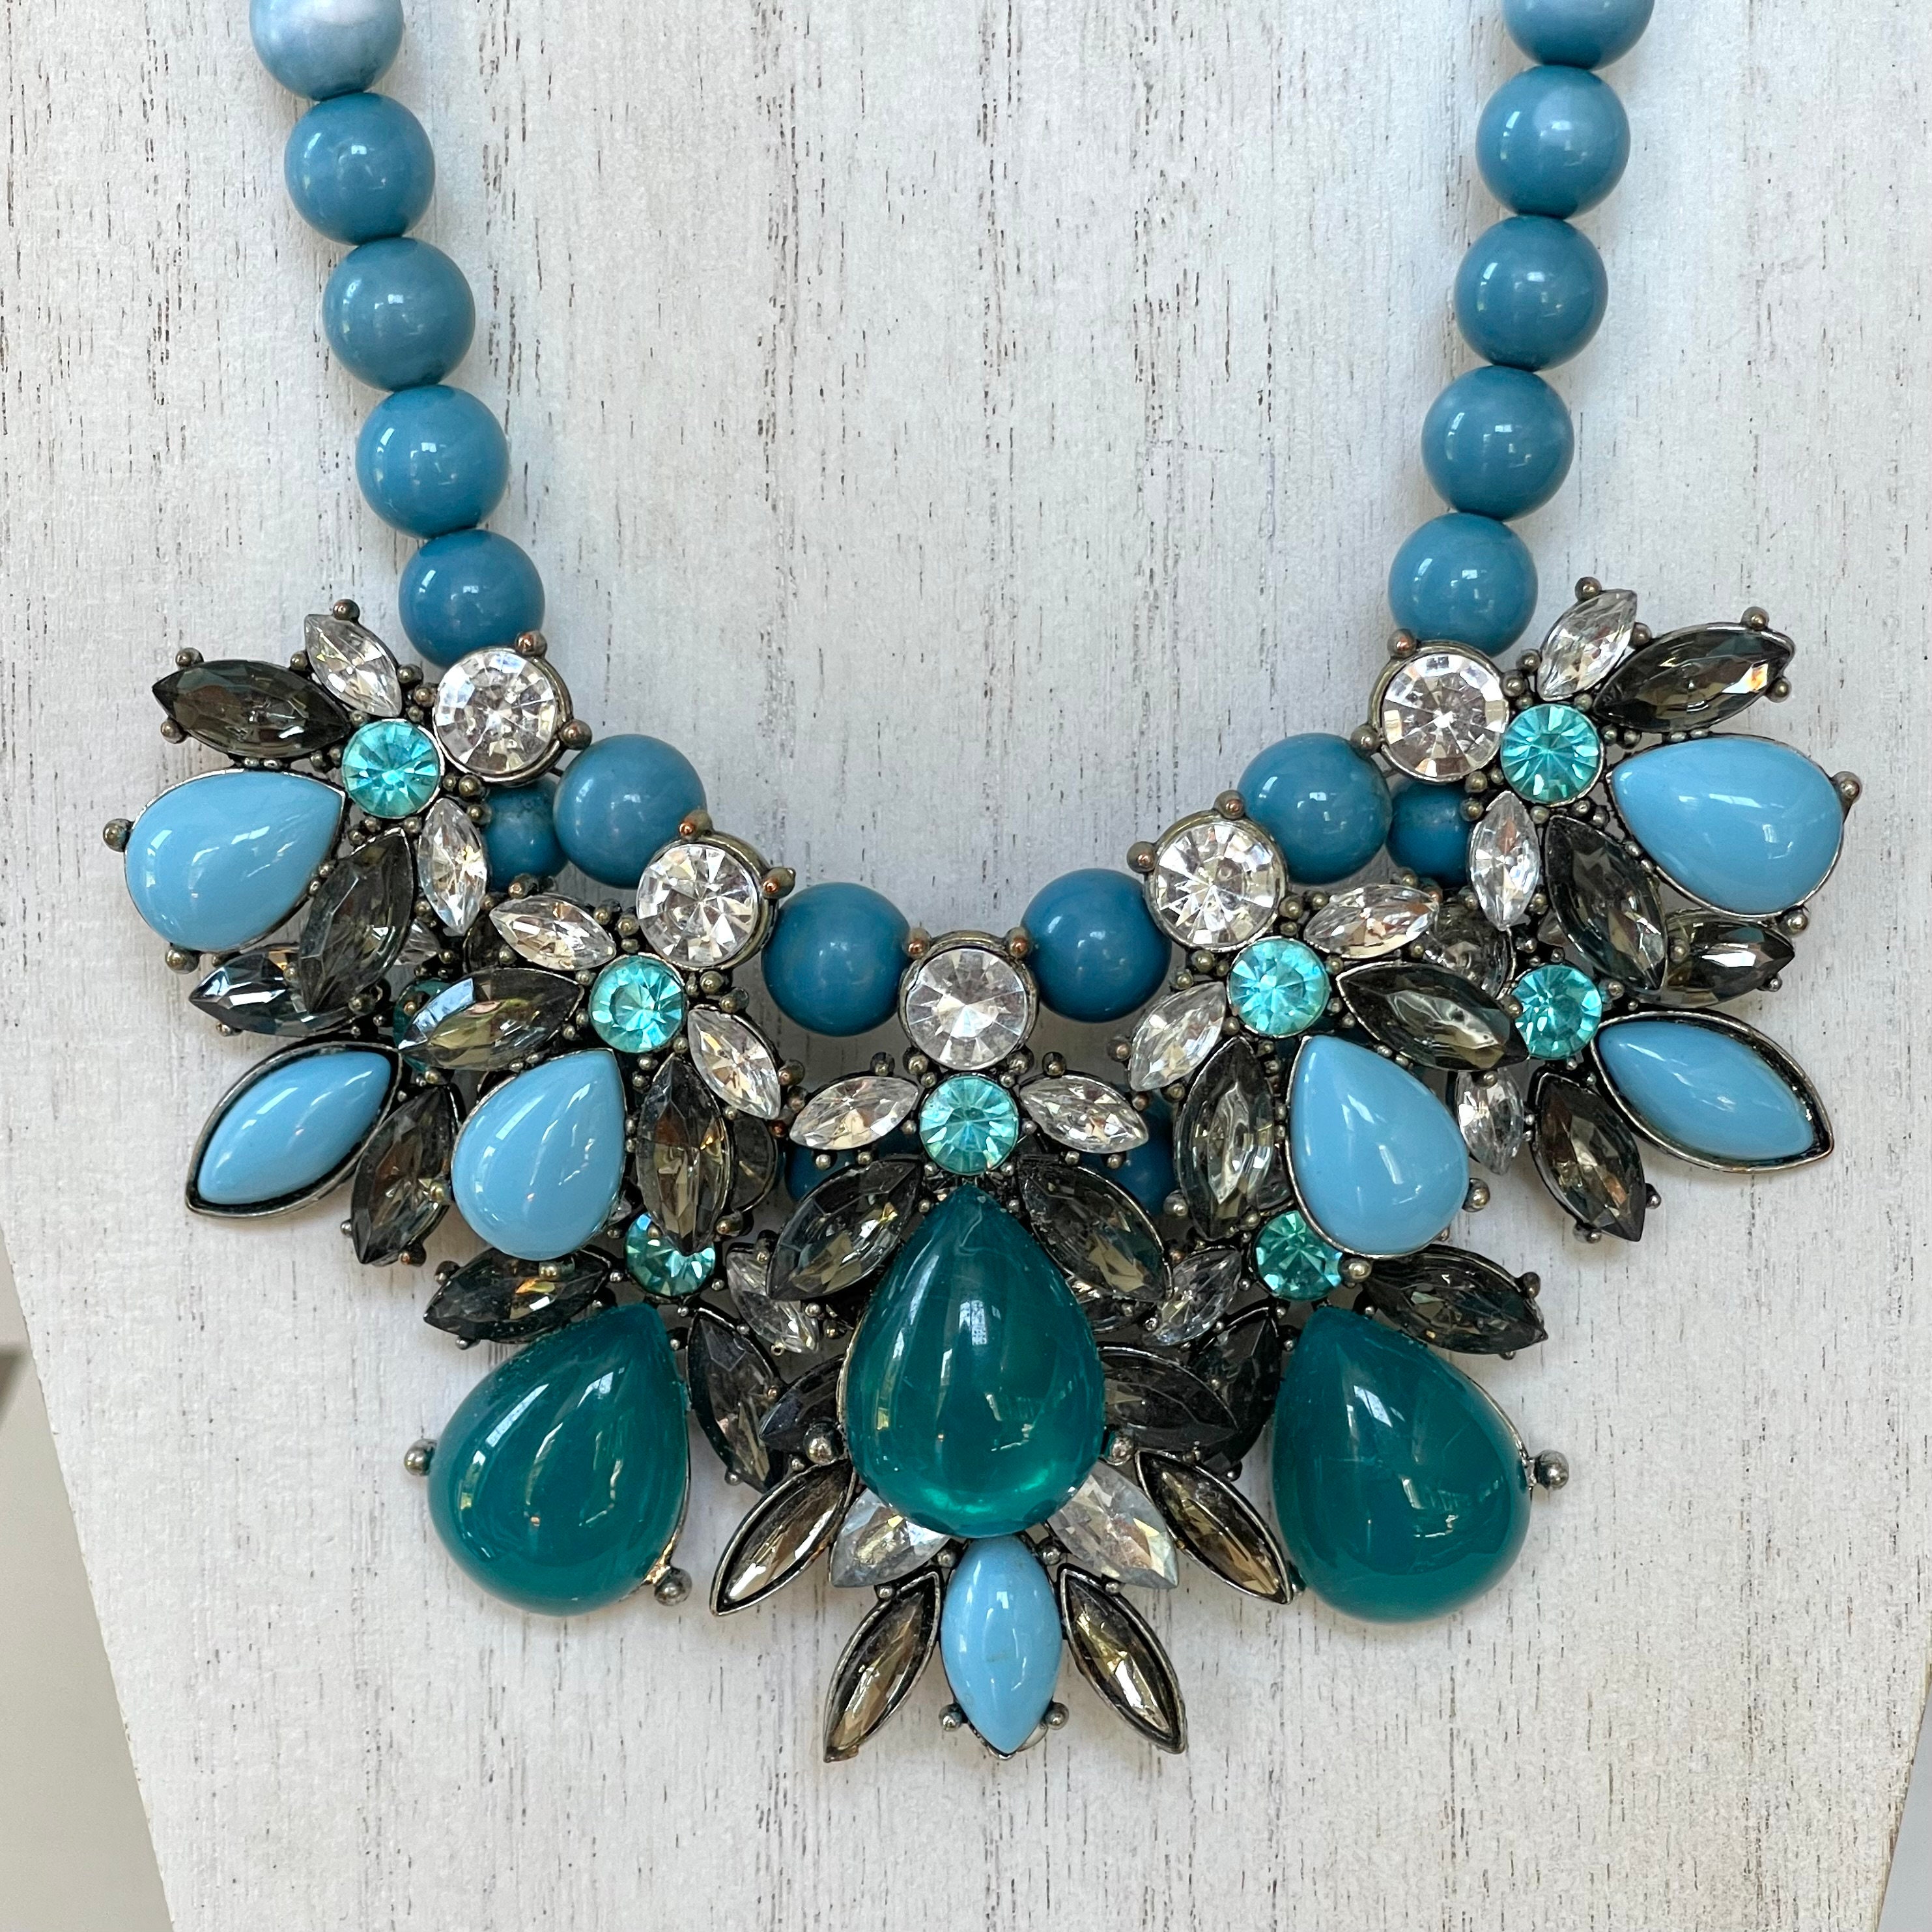 Turquoise Crochet Necklace | Designs by Denise